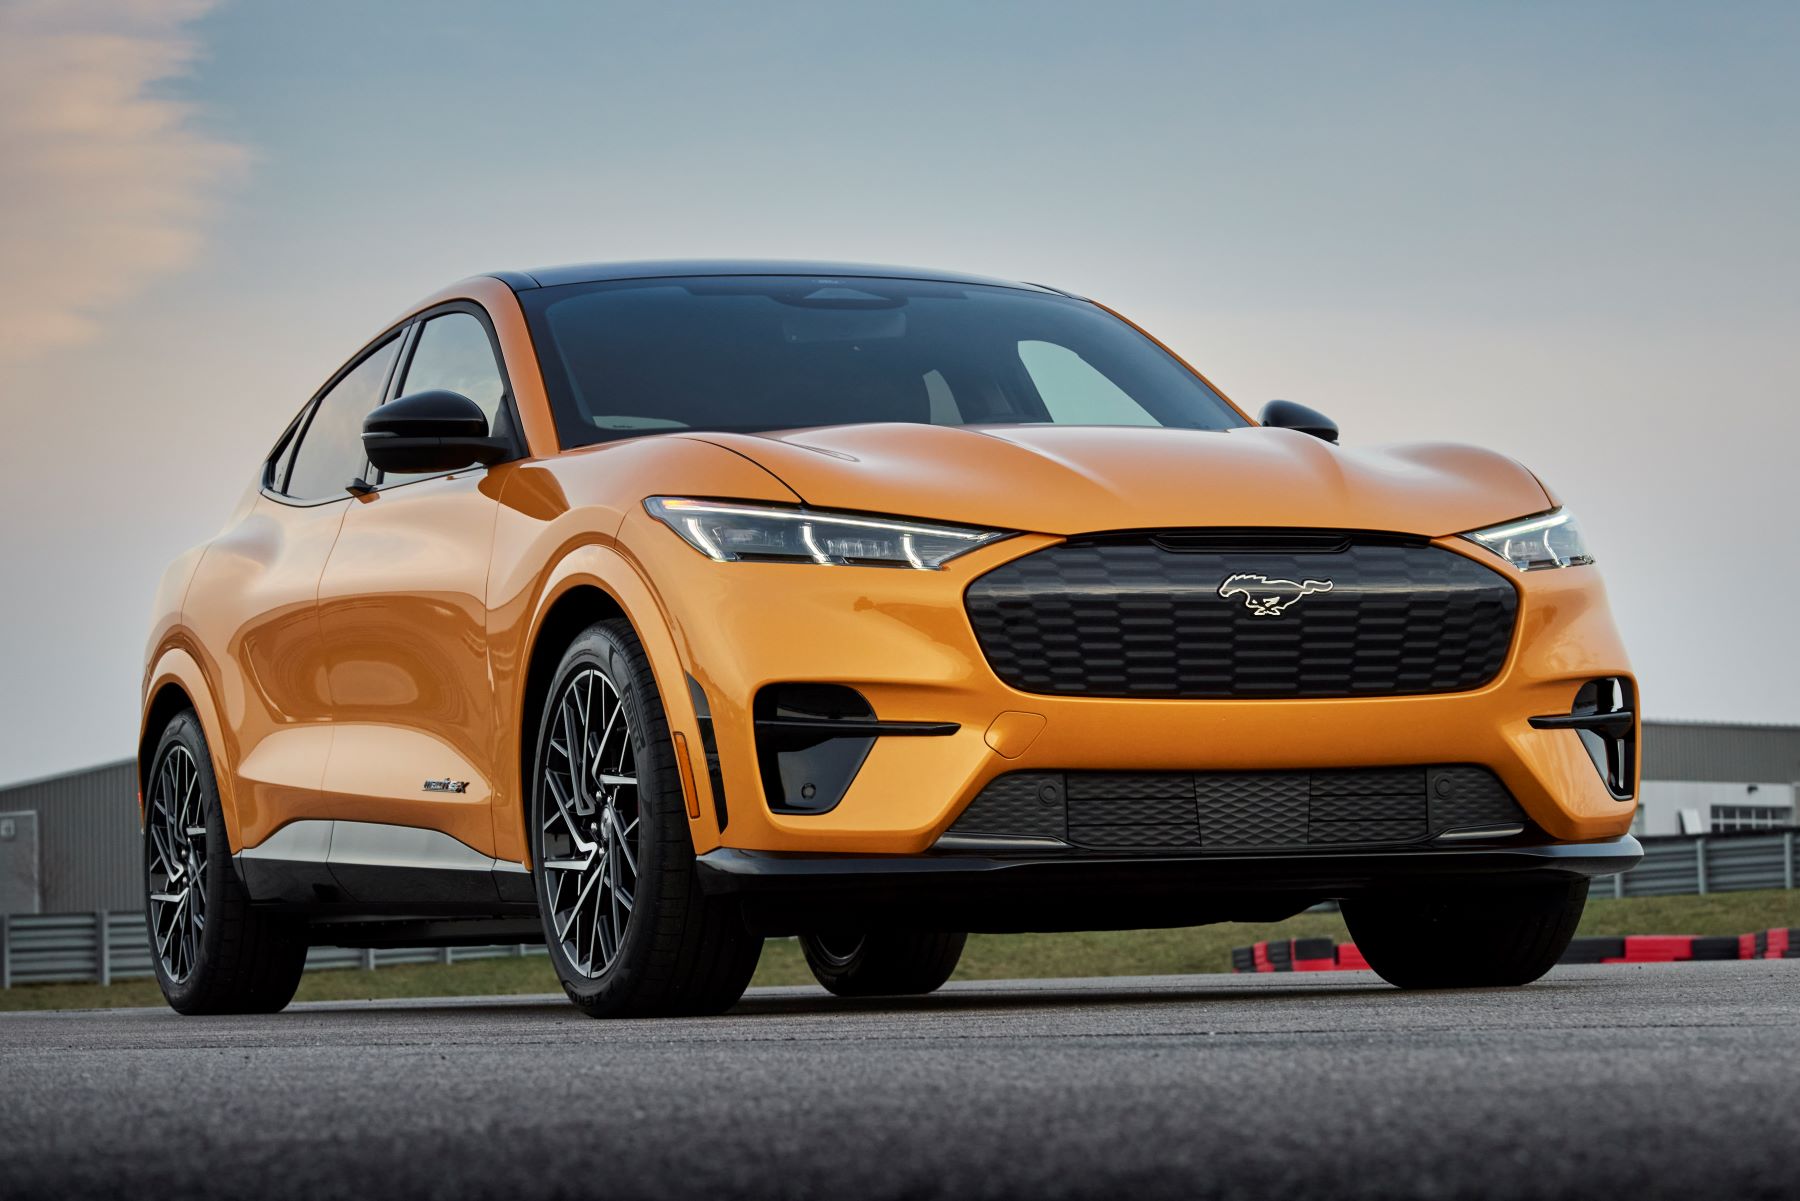 A 2021 Ford Mustang Mach-E GT all-electric compact SUV model with a gold color option parked on a race track